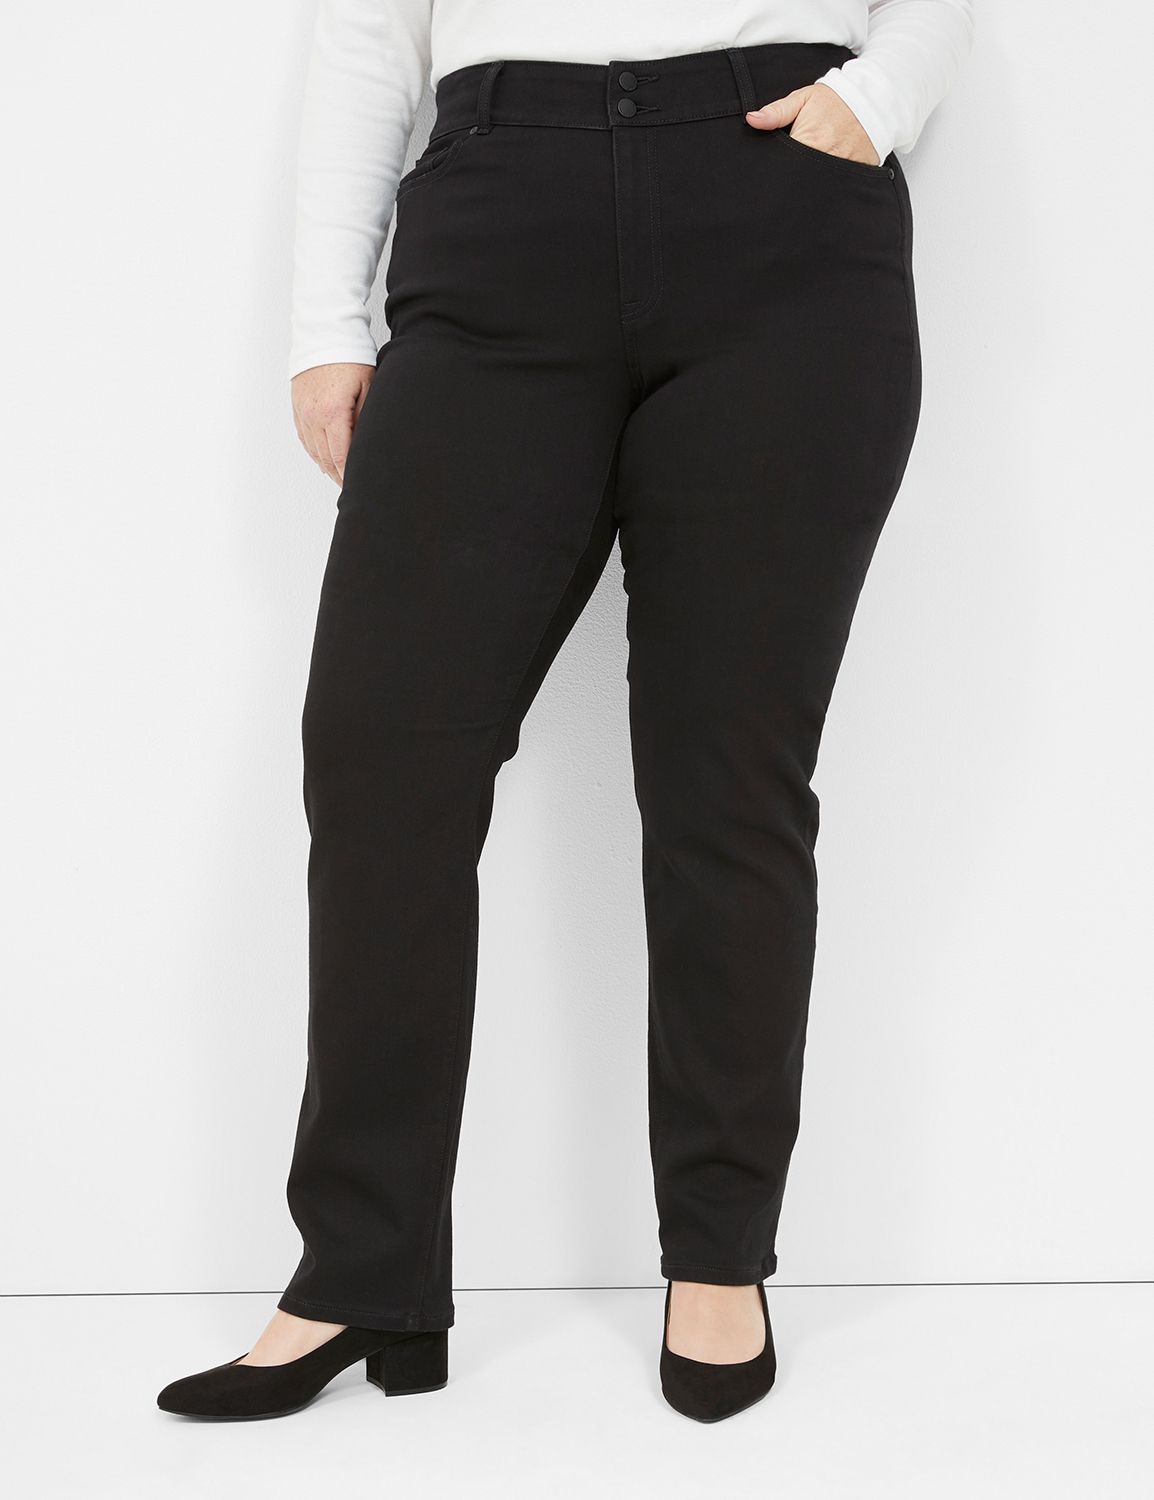 Seven7 Women's 4-Way Stretch Pull on Ponte Pant - Macy's